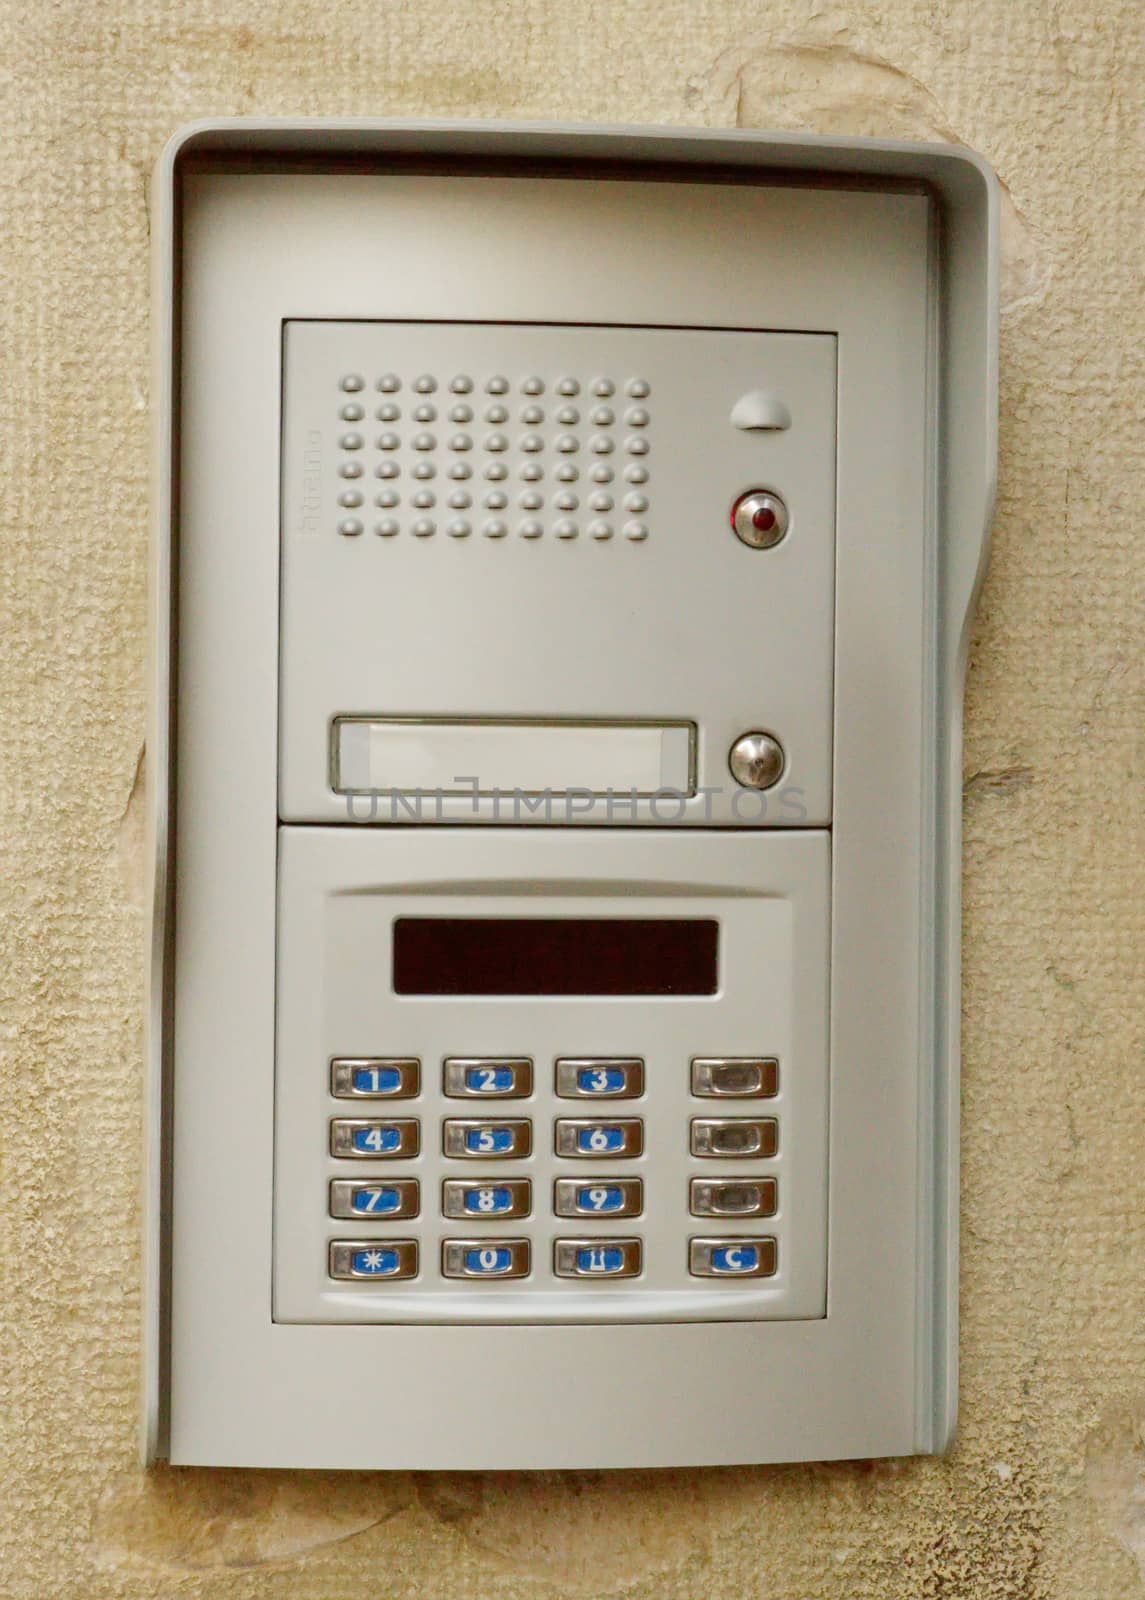 Close-up of building intercom on a wall